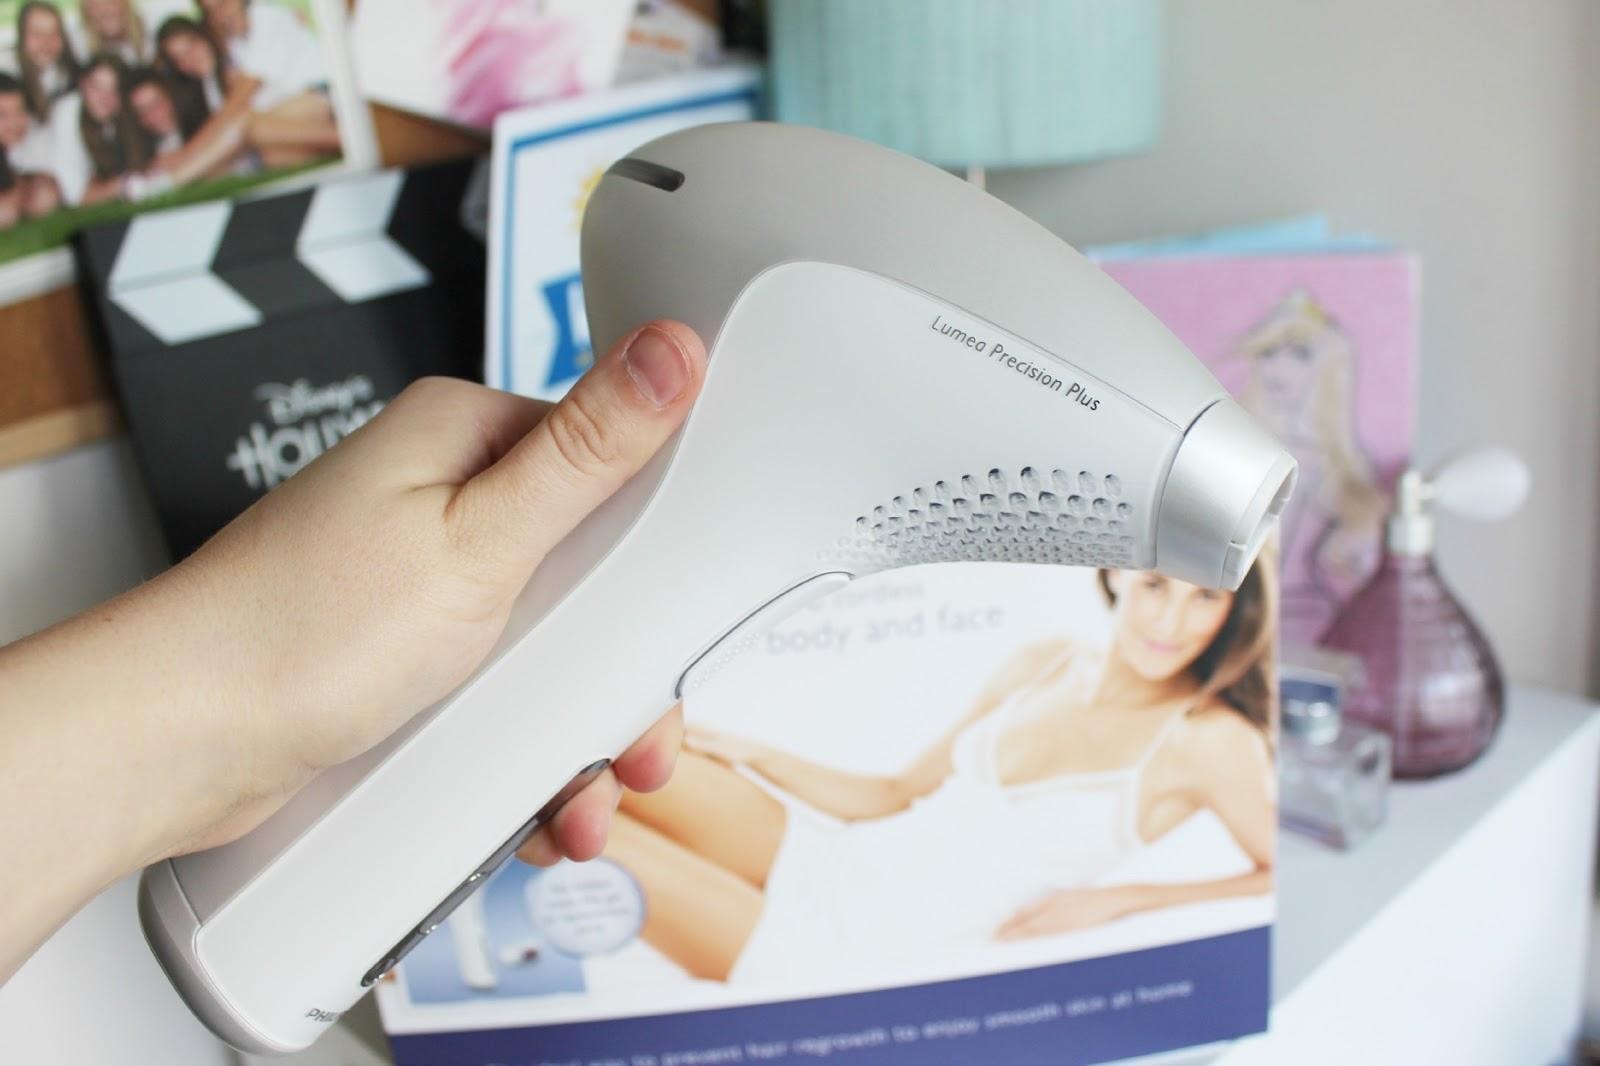 a picture of the Philips Lumea Precision Plan IPL Hair Removal System